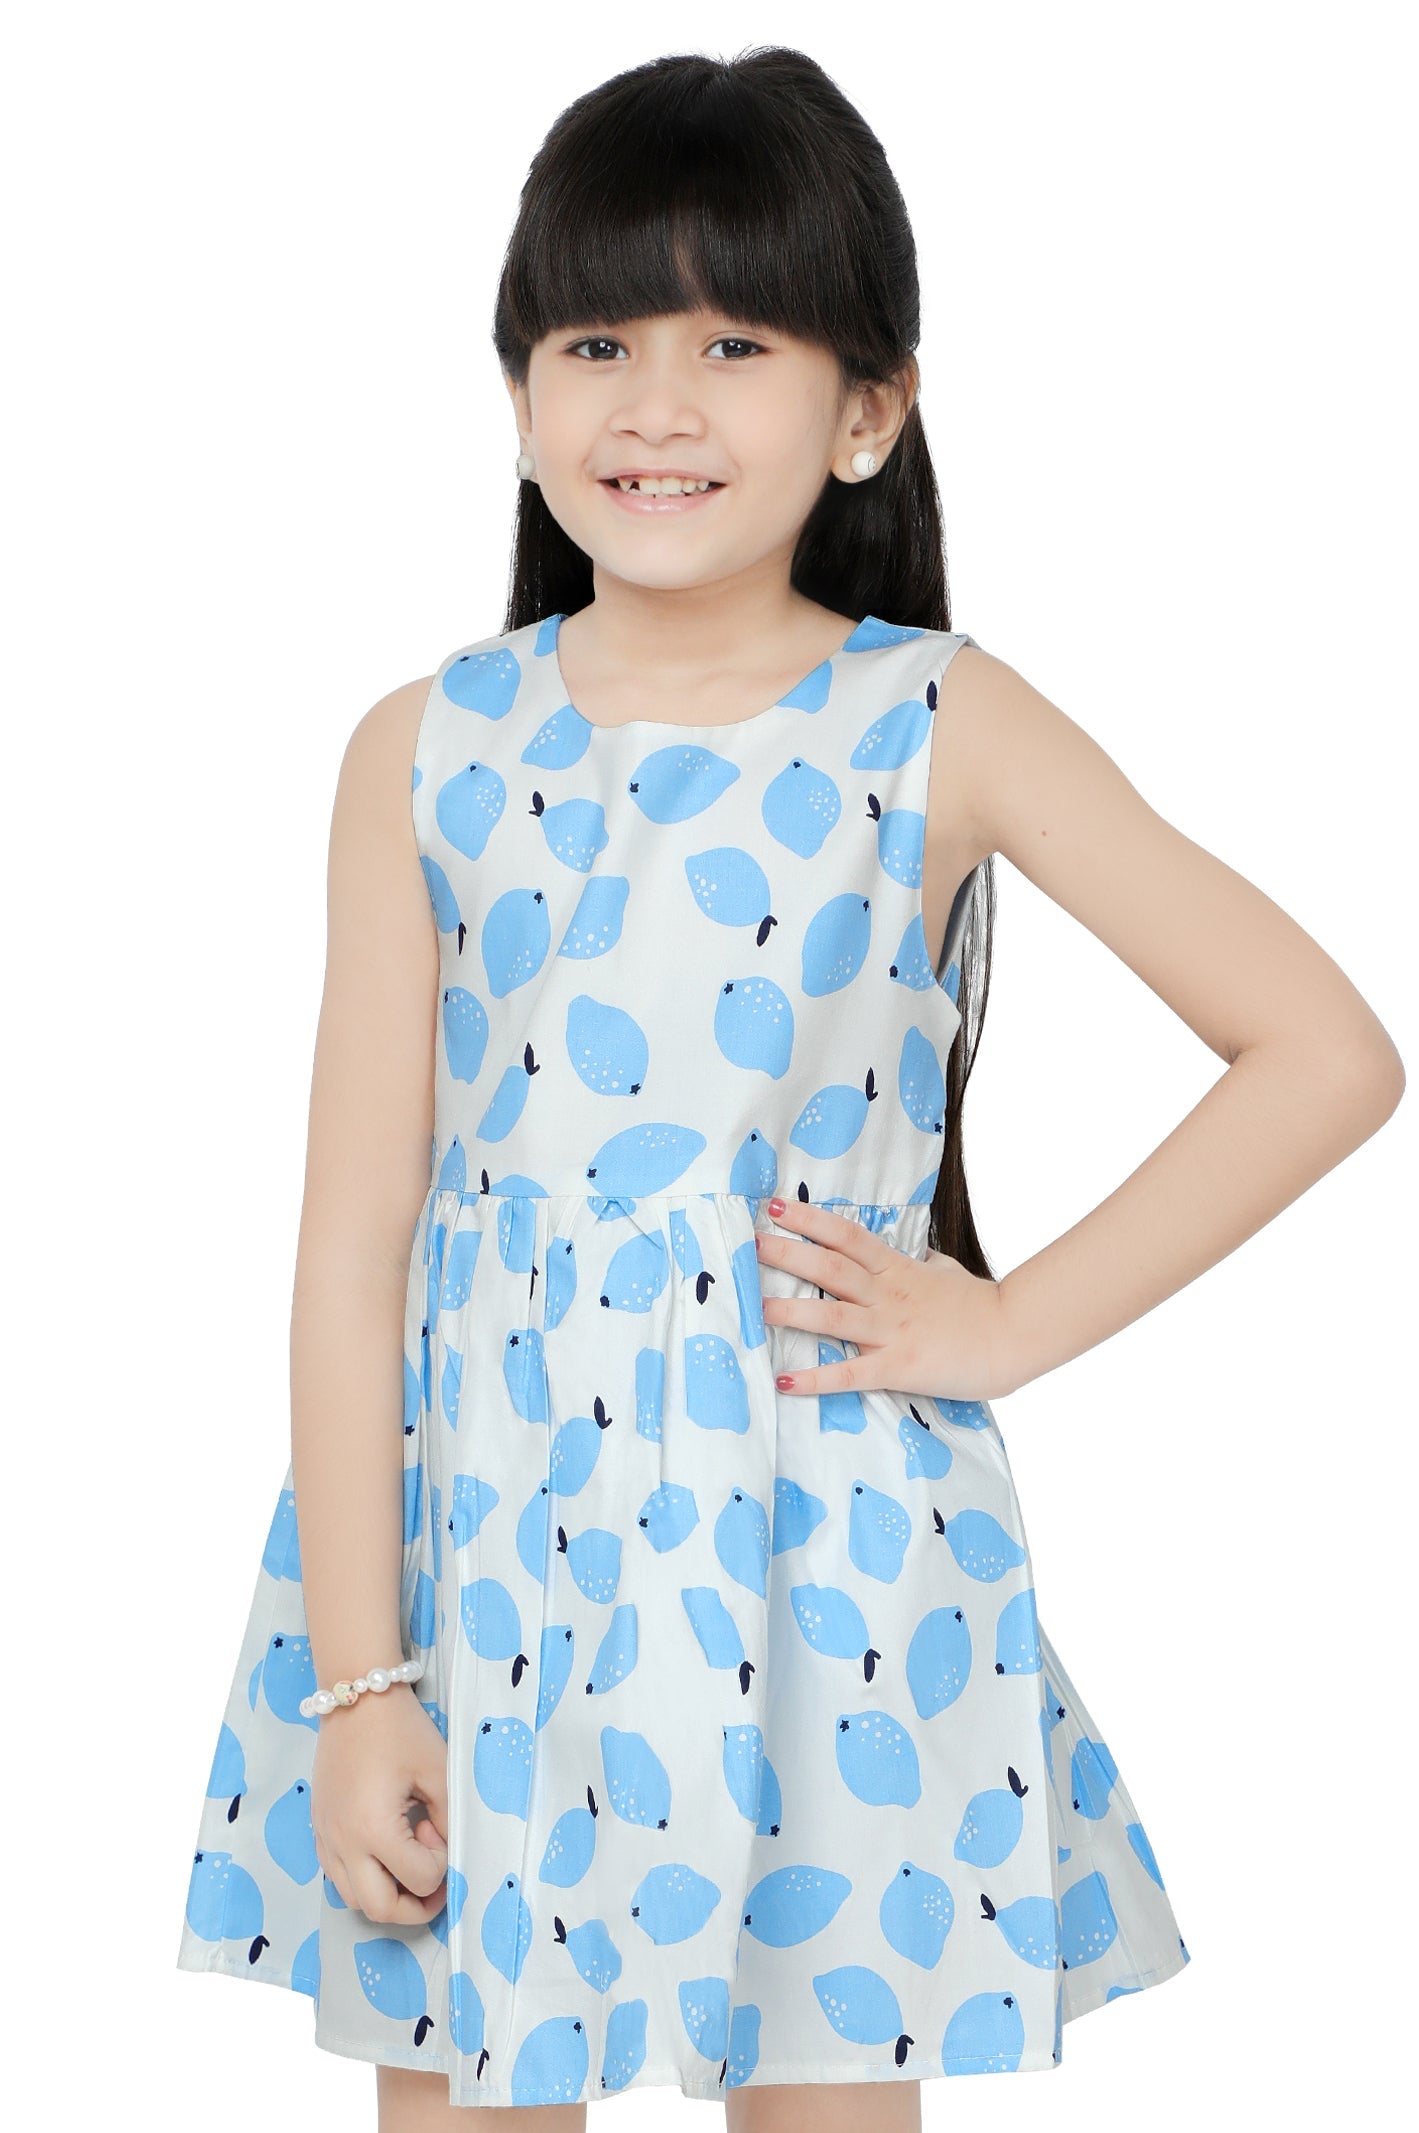 Girls Frock in White SKU: KGL-0340-WHITE - Diners